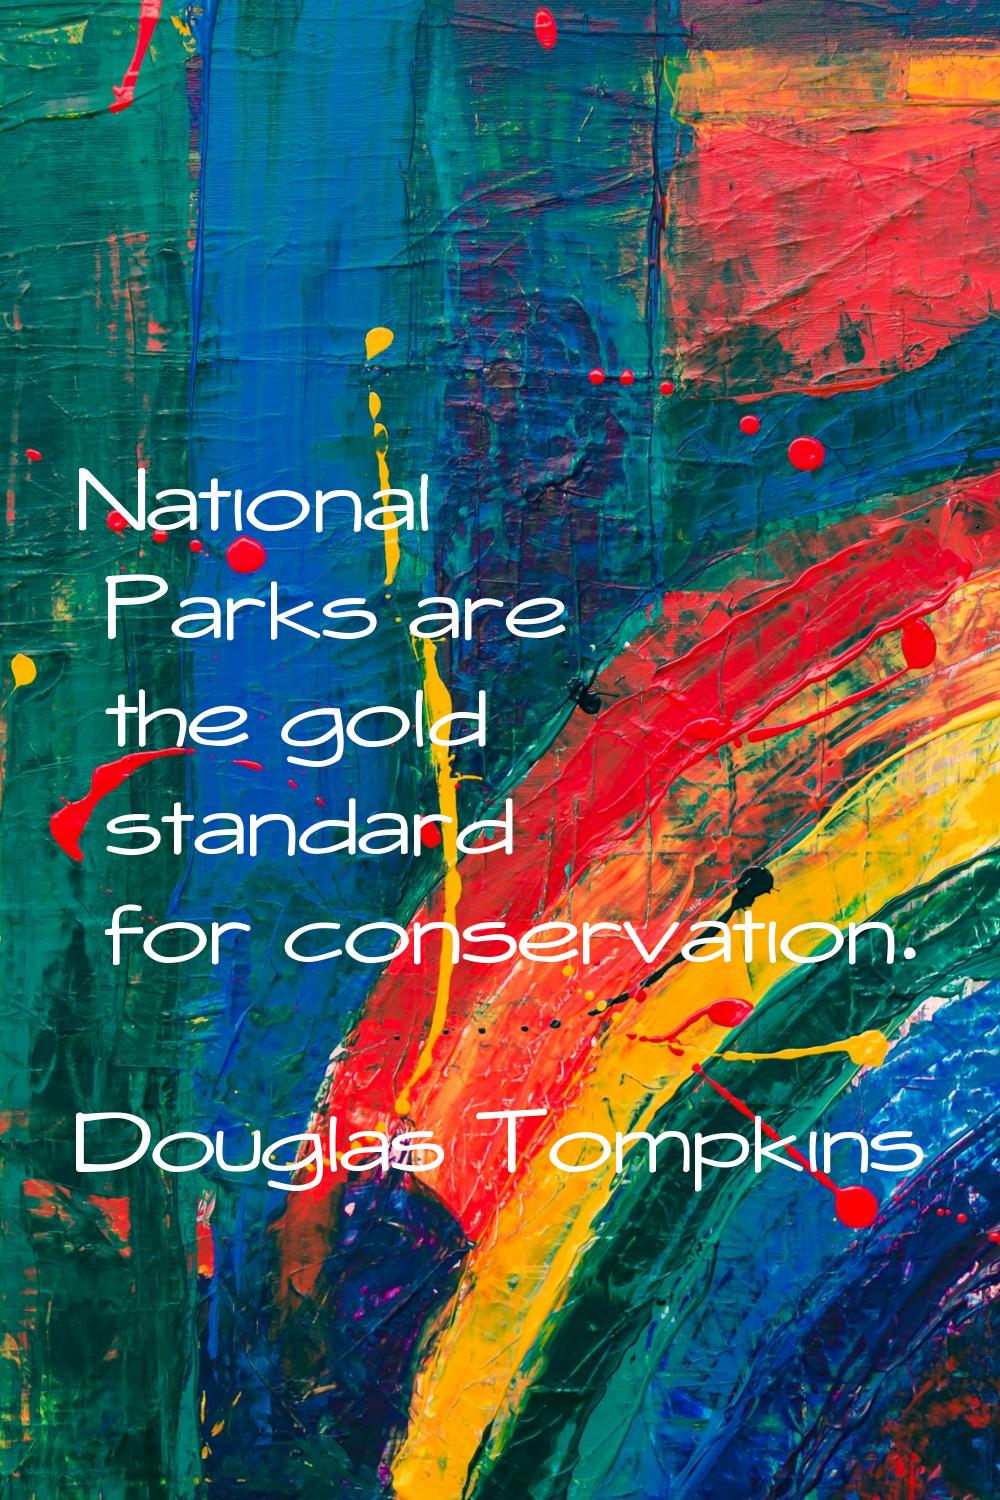 National Parks are the gold standard for conservation.